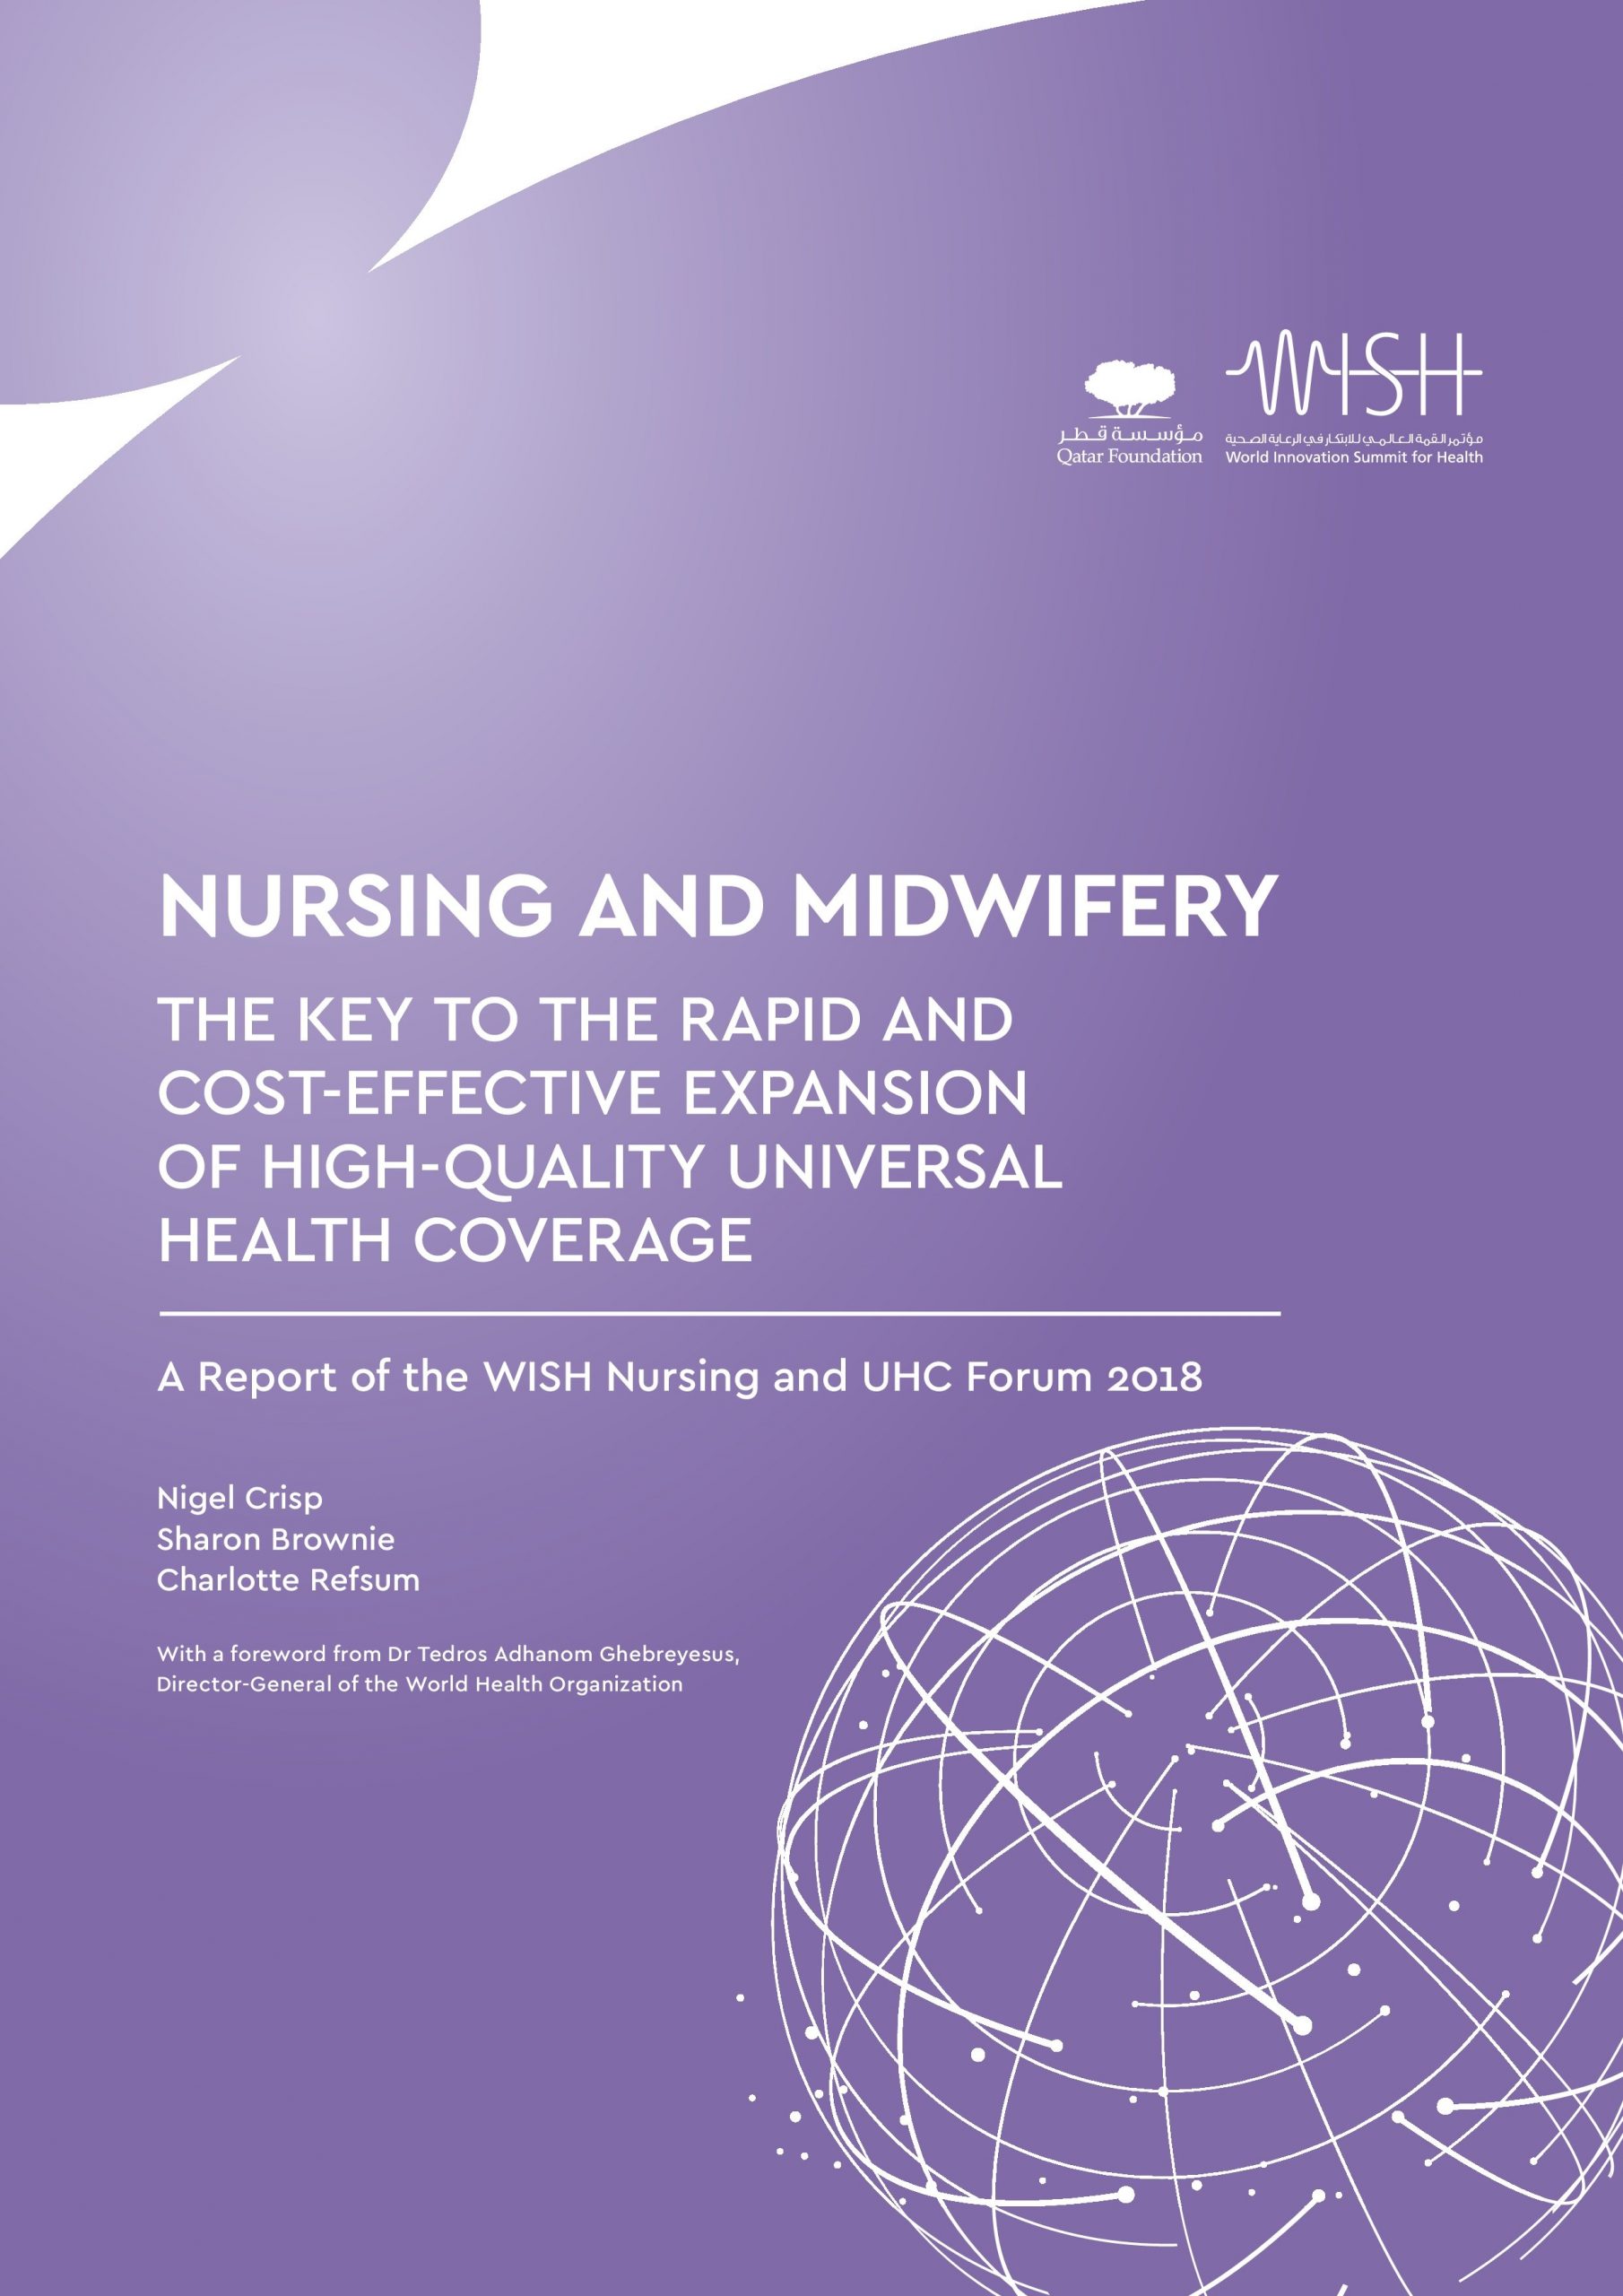 Nursing and Midwifery: The Key to the Rapid and Cost-Effective Expansion of High-Quality Universal Health Coverage